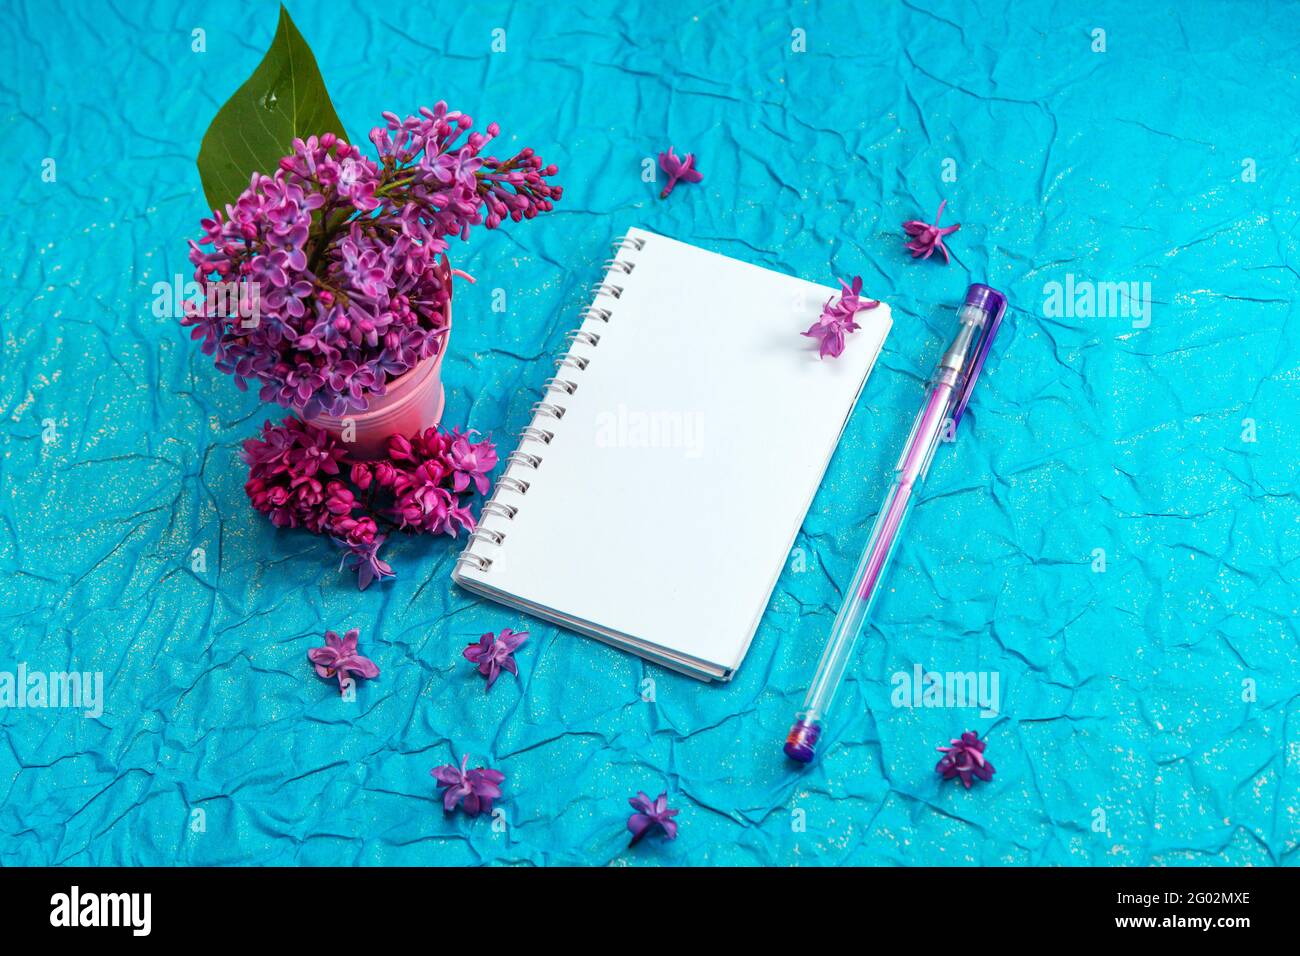 Blank notebook, pen with purple ink, lilac flowers on vintage blue paper background. Stock Photo